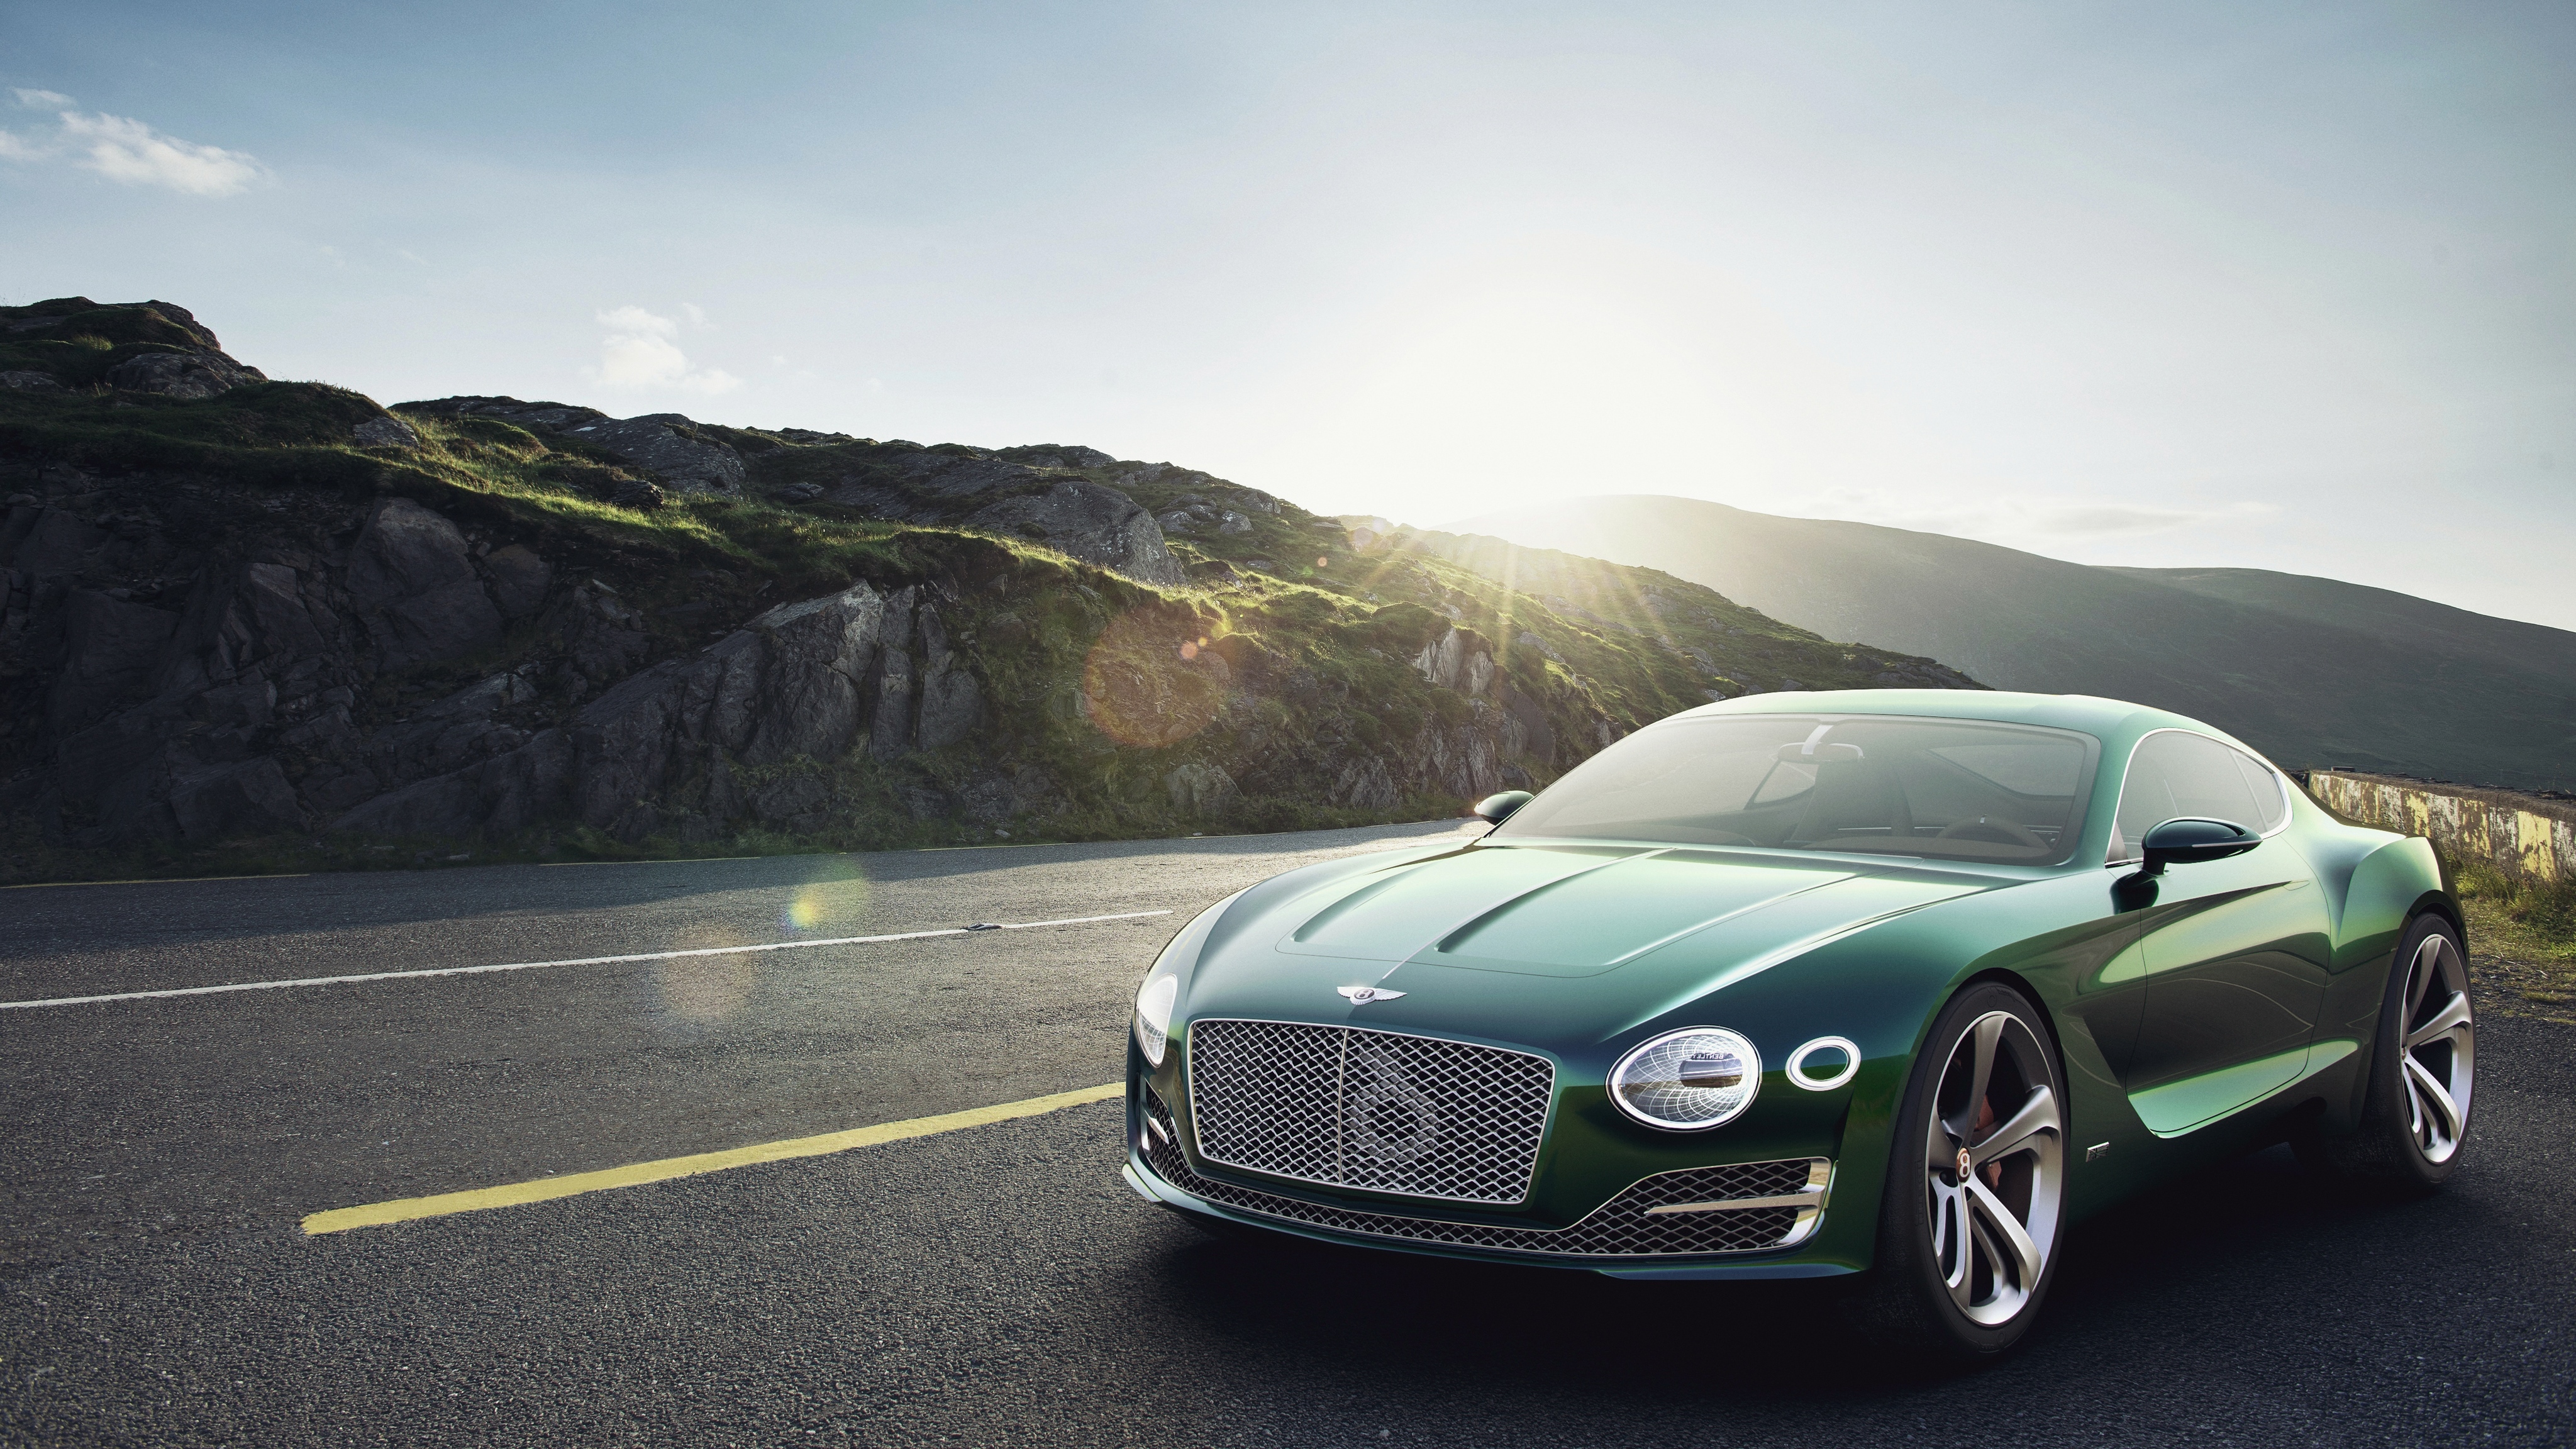 bentley, green, front view, cars, 2015, exp 10 4K Ultra